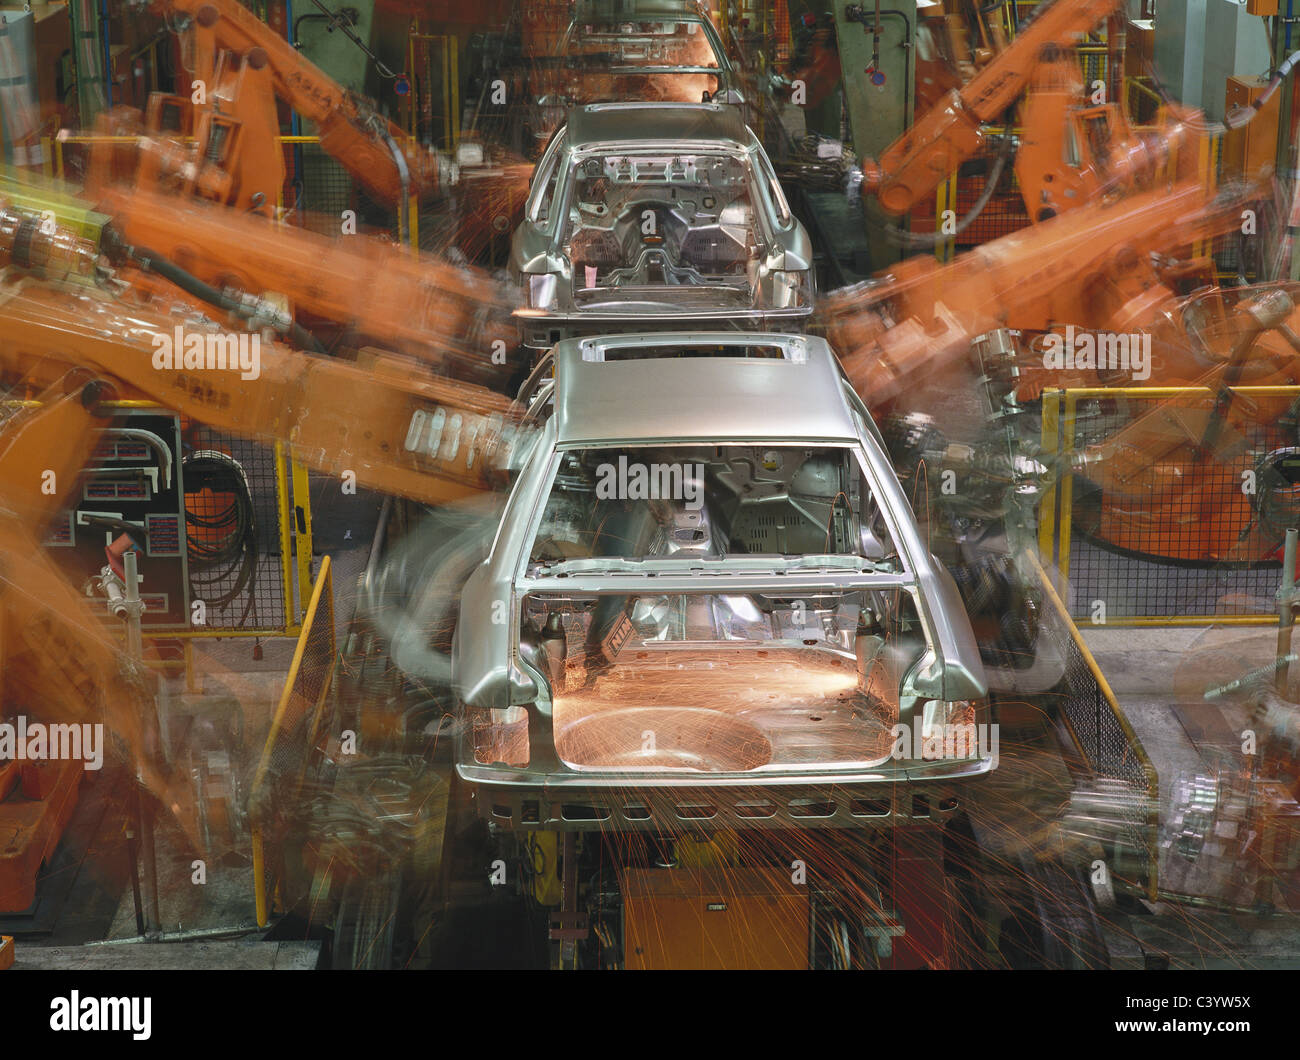 Assembly, Assembly Line, Automation, Automobile, Body, Car, Economy, Europe, European, Factory, Fitting, German, Germany, Hi-Tec Stock Photo